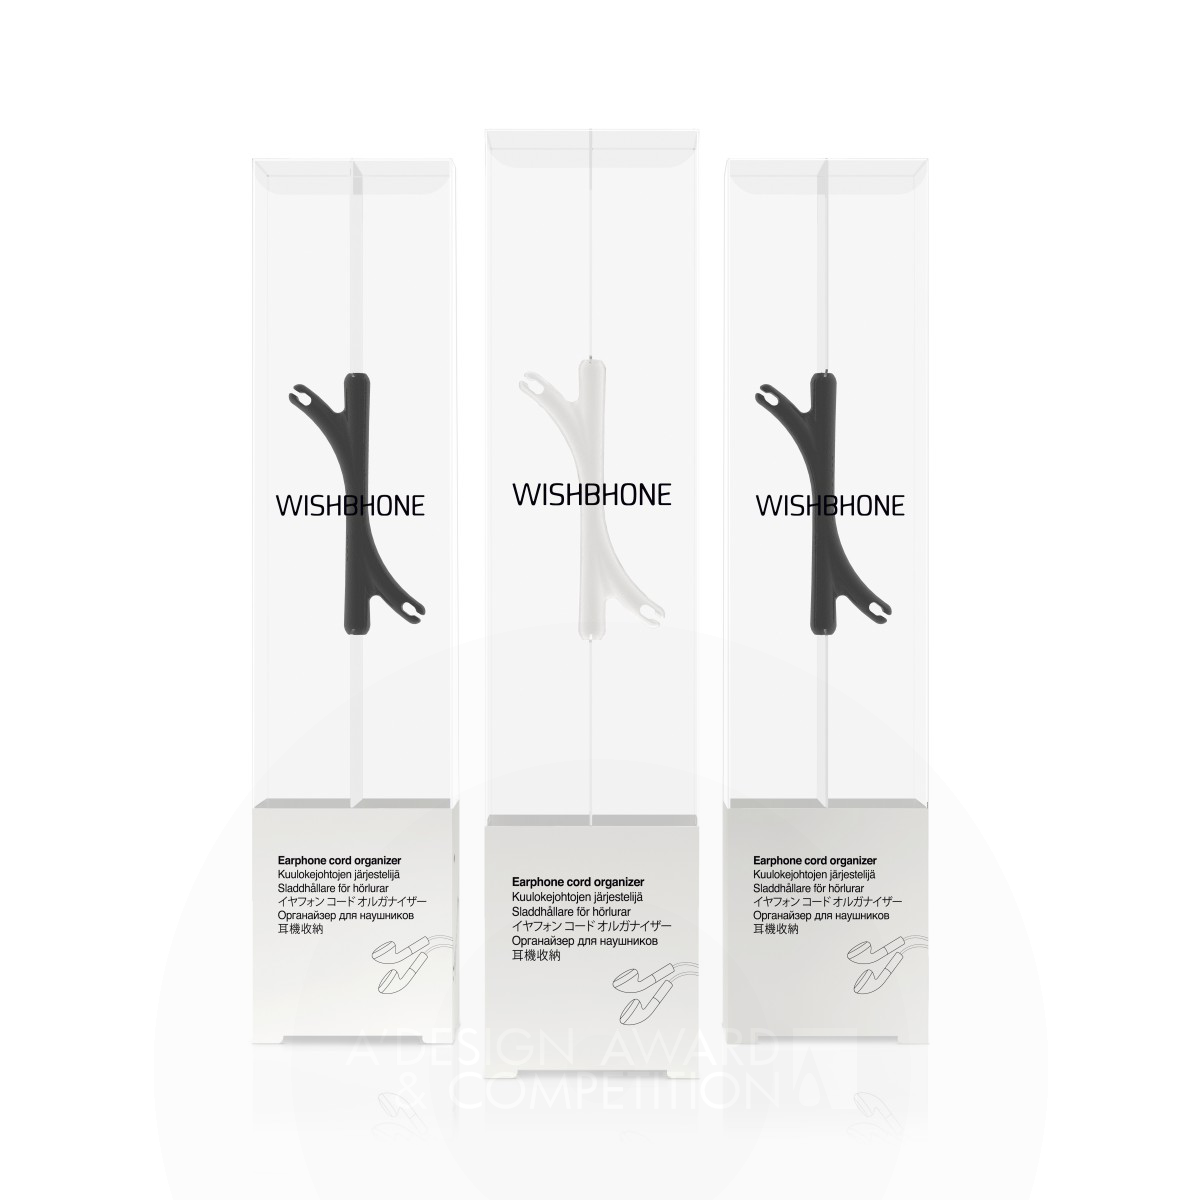 Wishbhone Product-Packaging Integration by Packlab